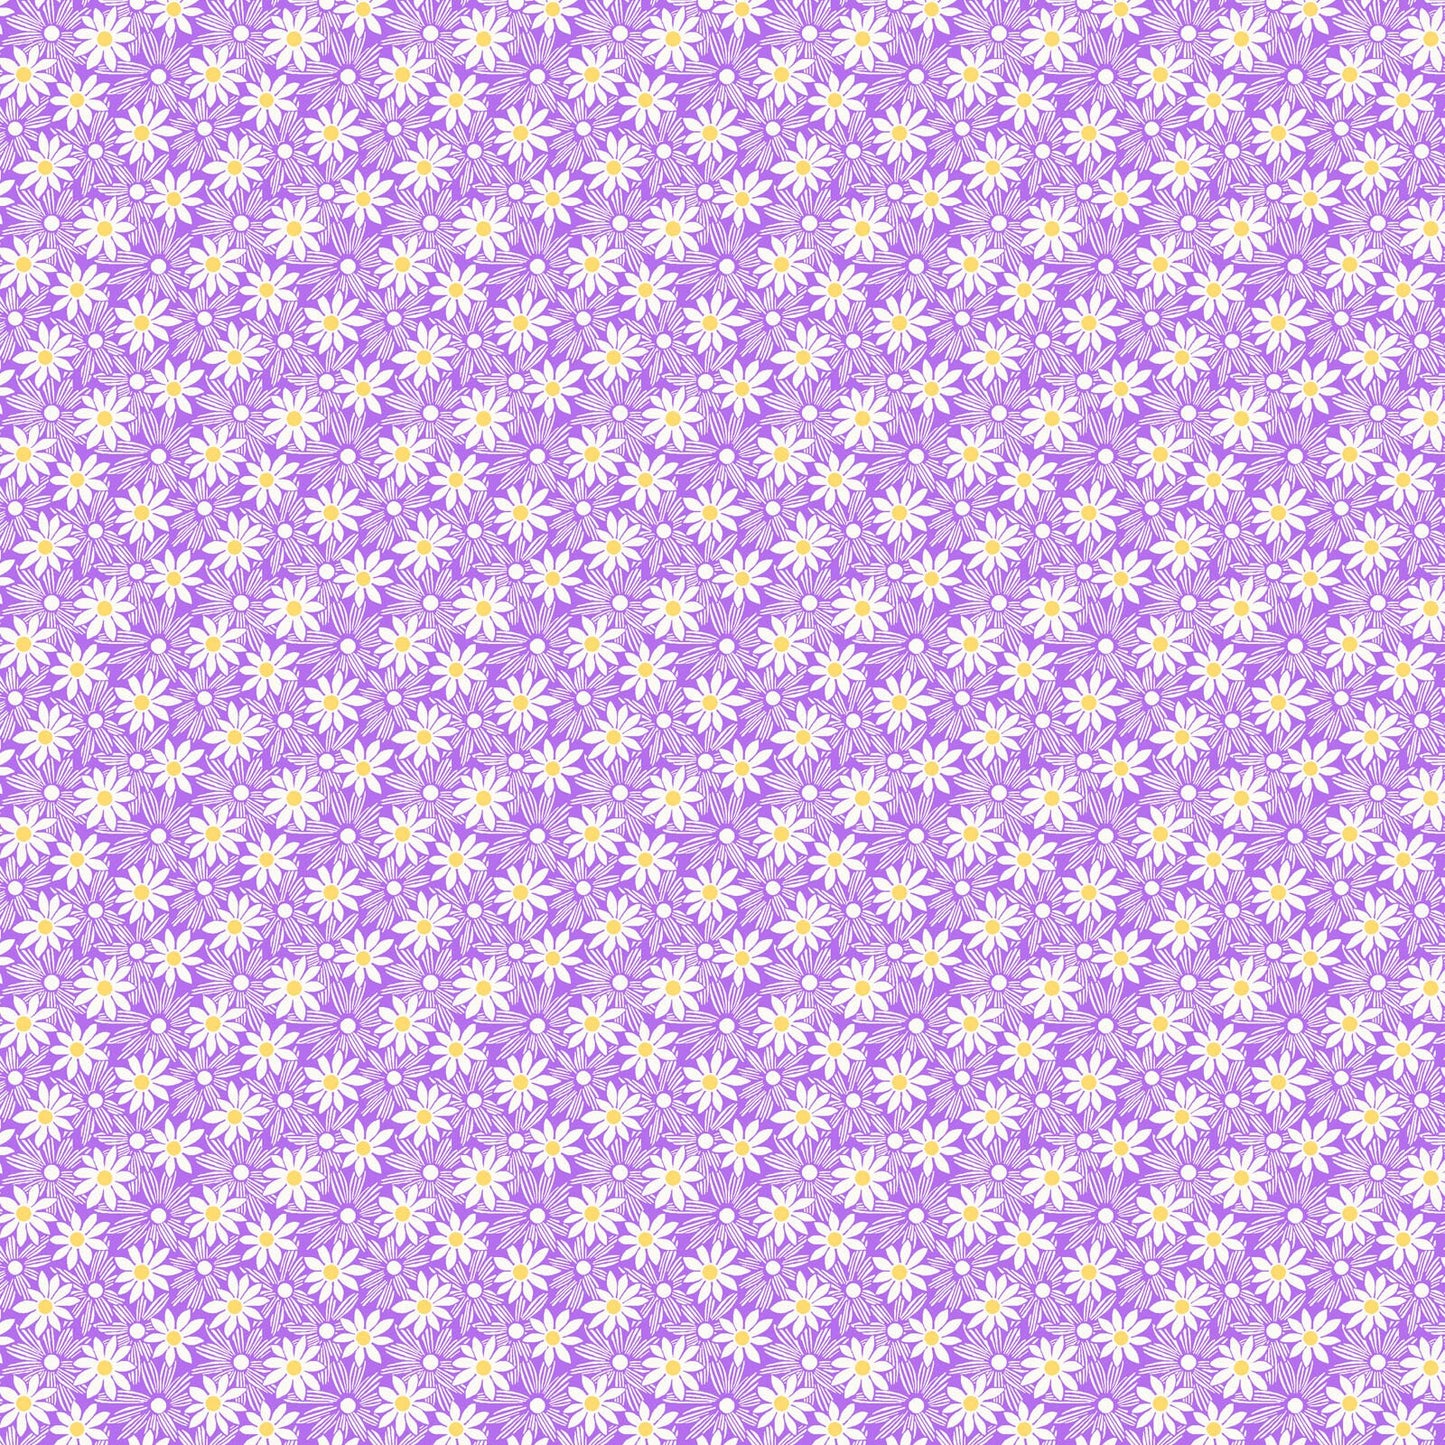 Nana Mae 7 Monotone Daisies in Lilac by Henry Glass. Continuous Cuts of Quilter's Cotton